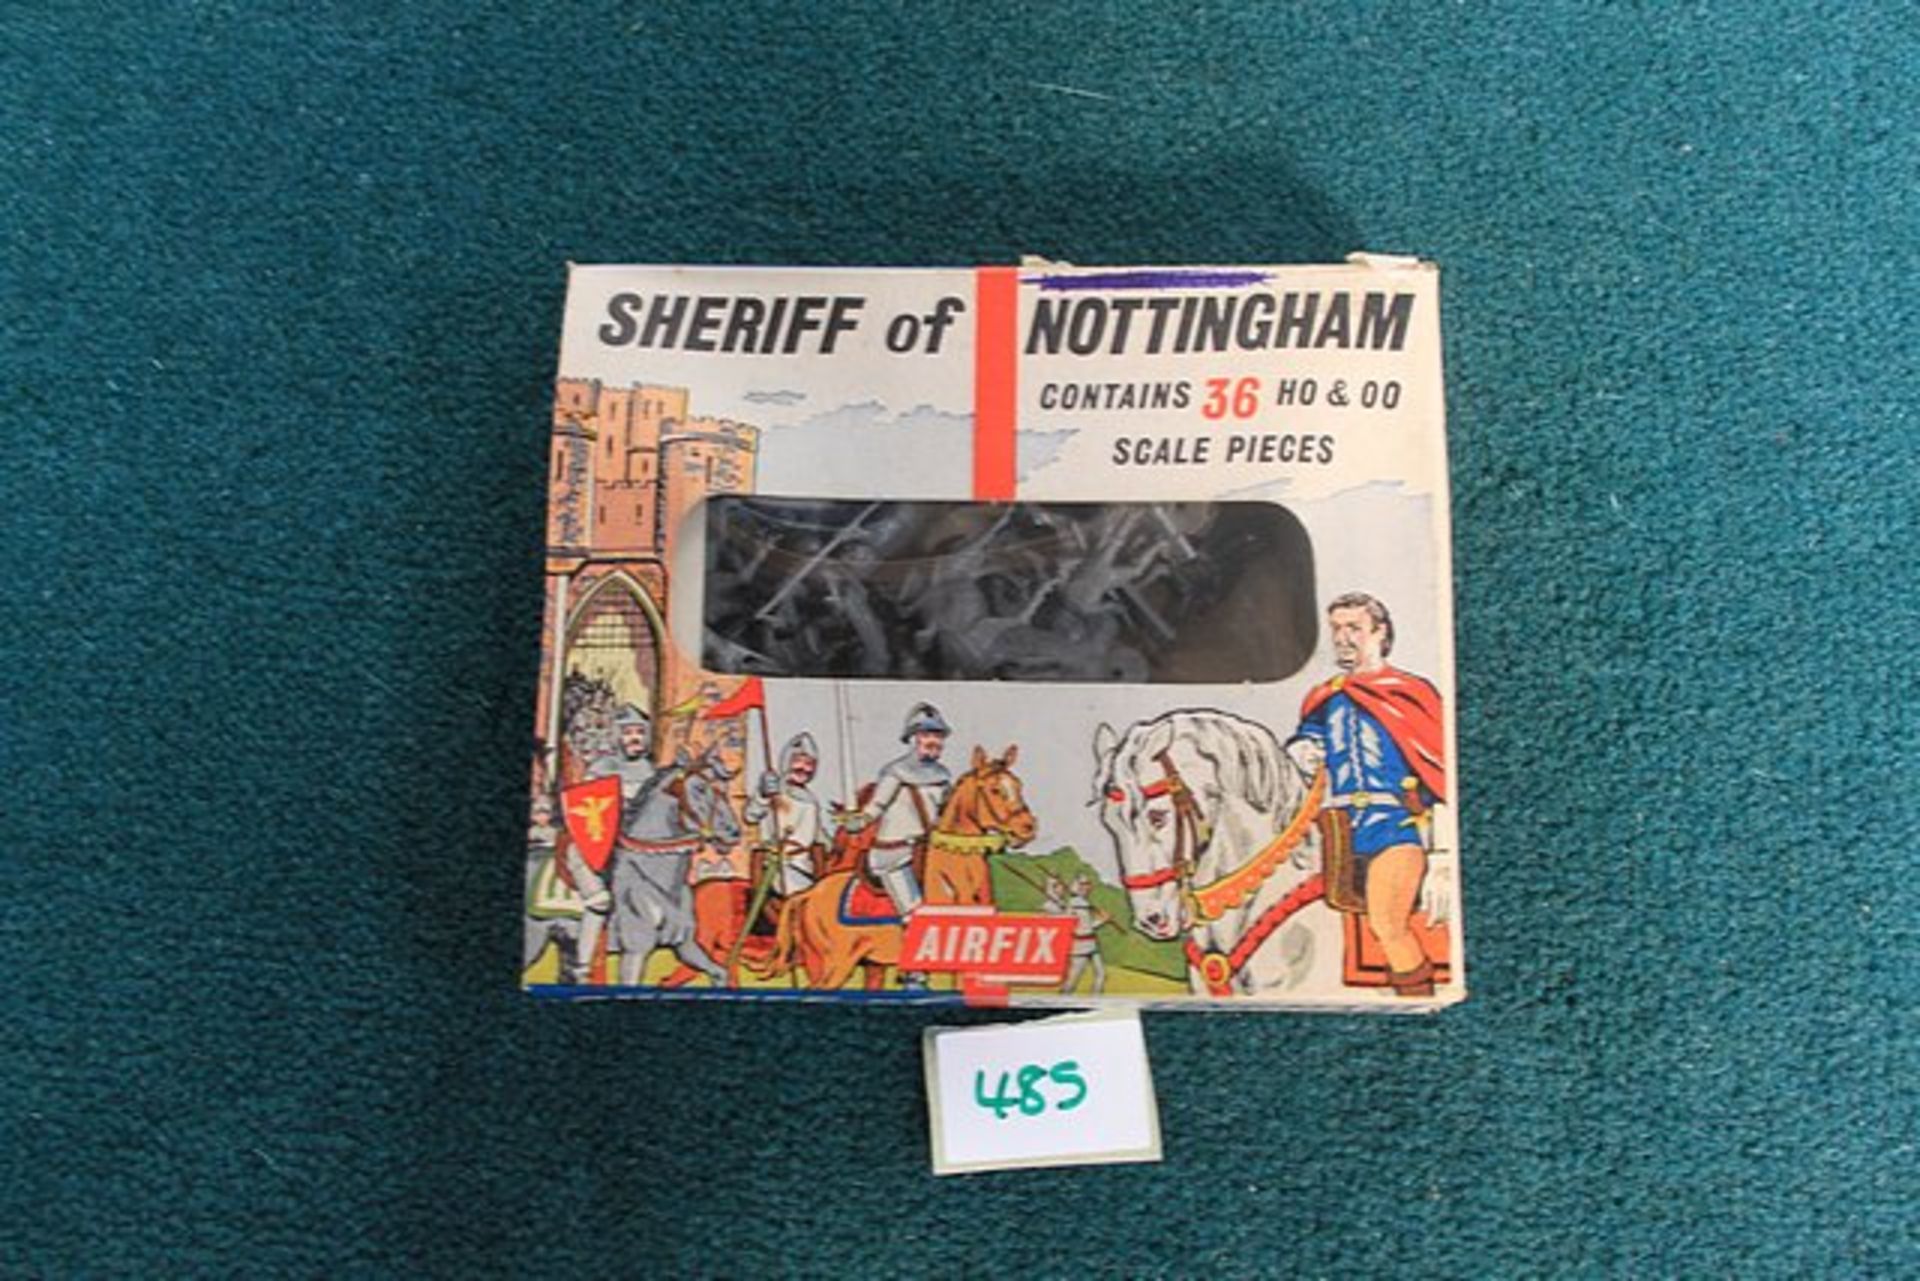 Airfix Model Kit Containing H0-00 Scale Sheriff Of Nottingham Contains 36 Pieces Complete In Box